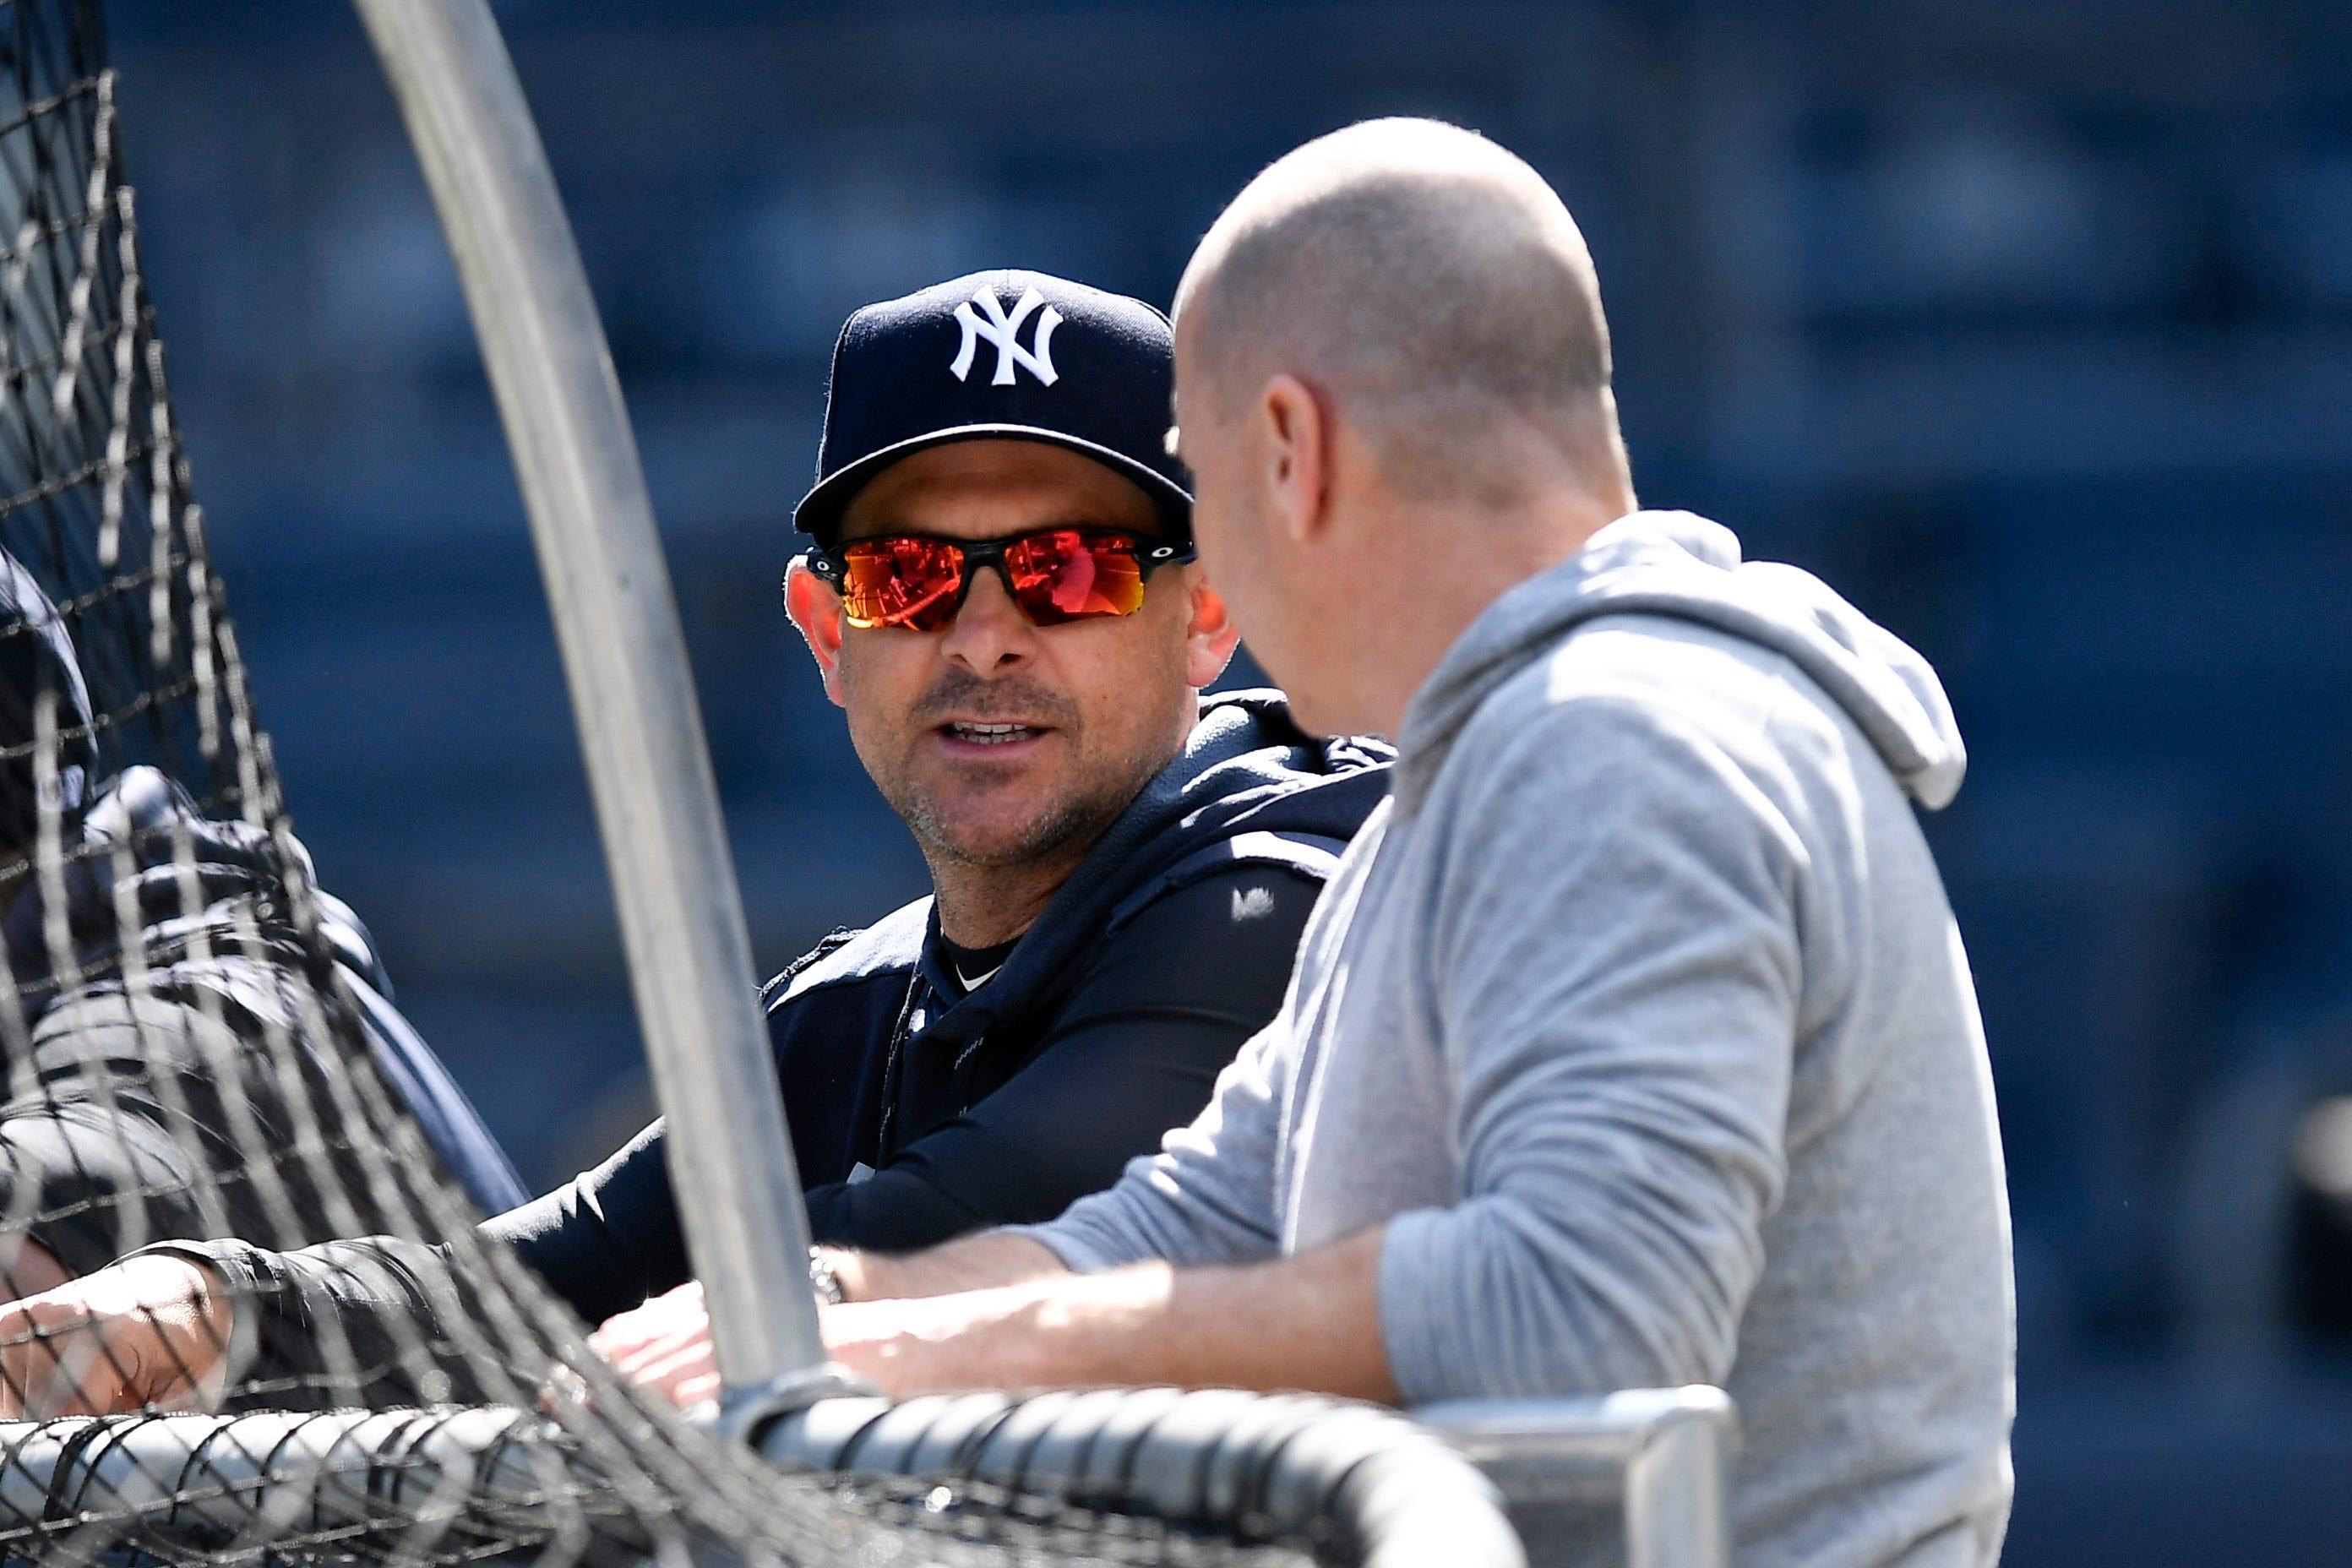 Aaron Boone and Brian Cashman talk at the batting cage / USA Today